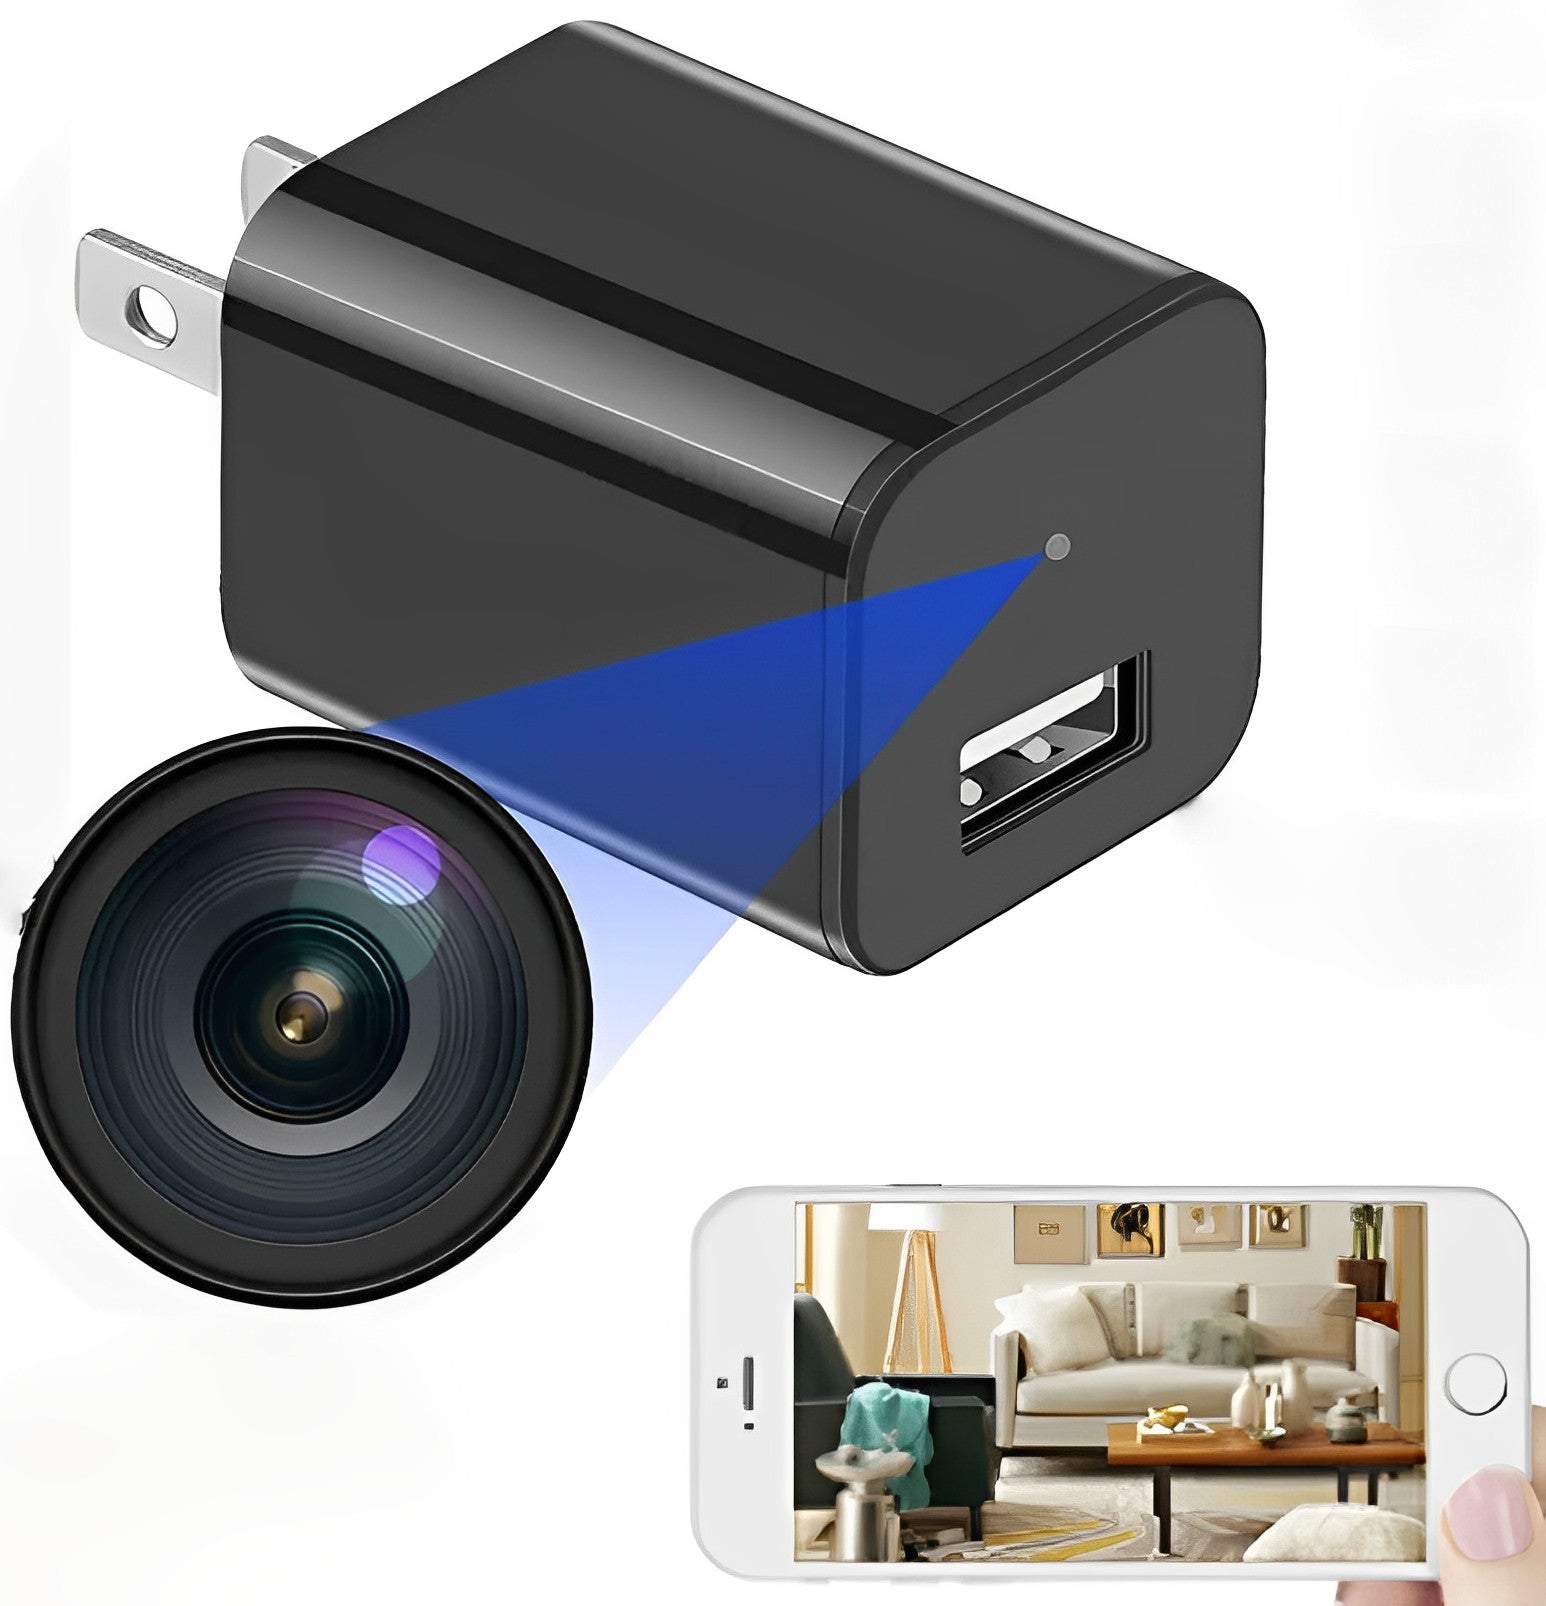 Small Security Tiny Camera For Home With Audio And Video Recording